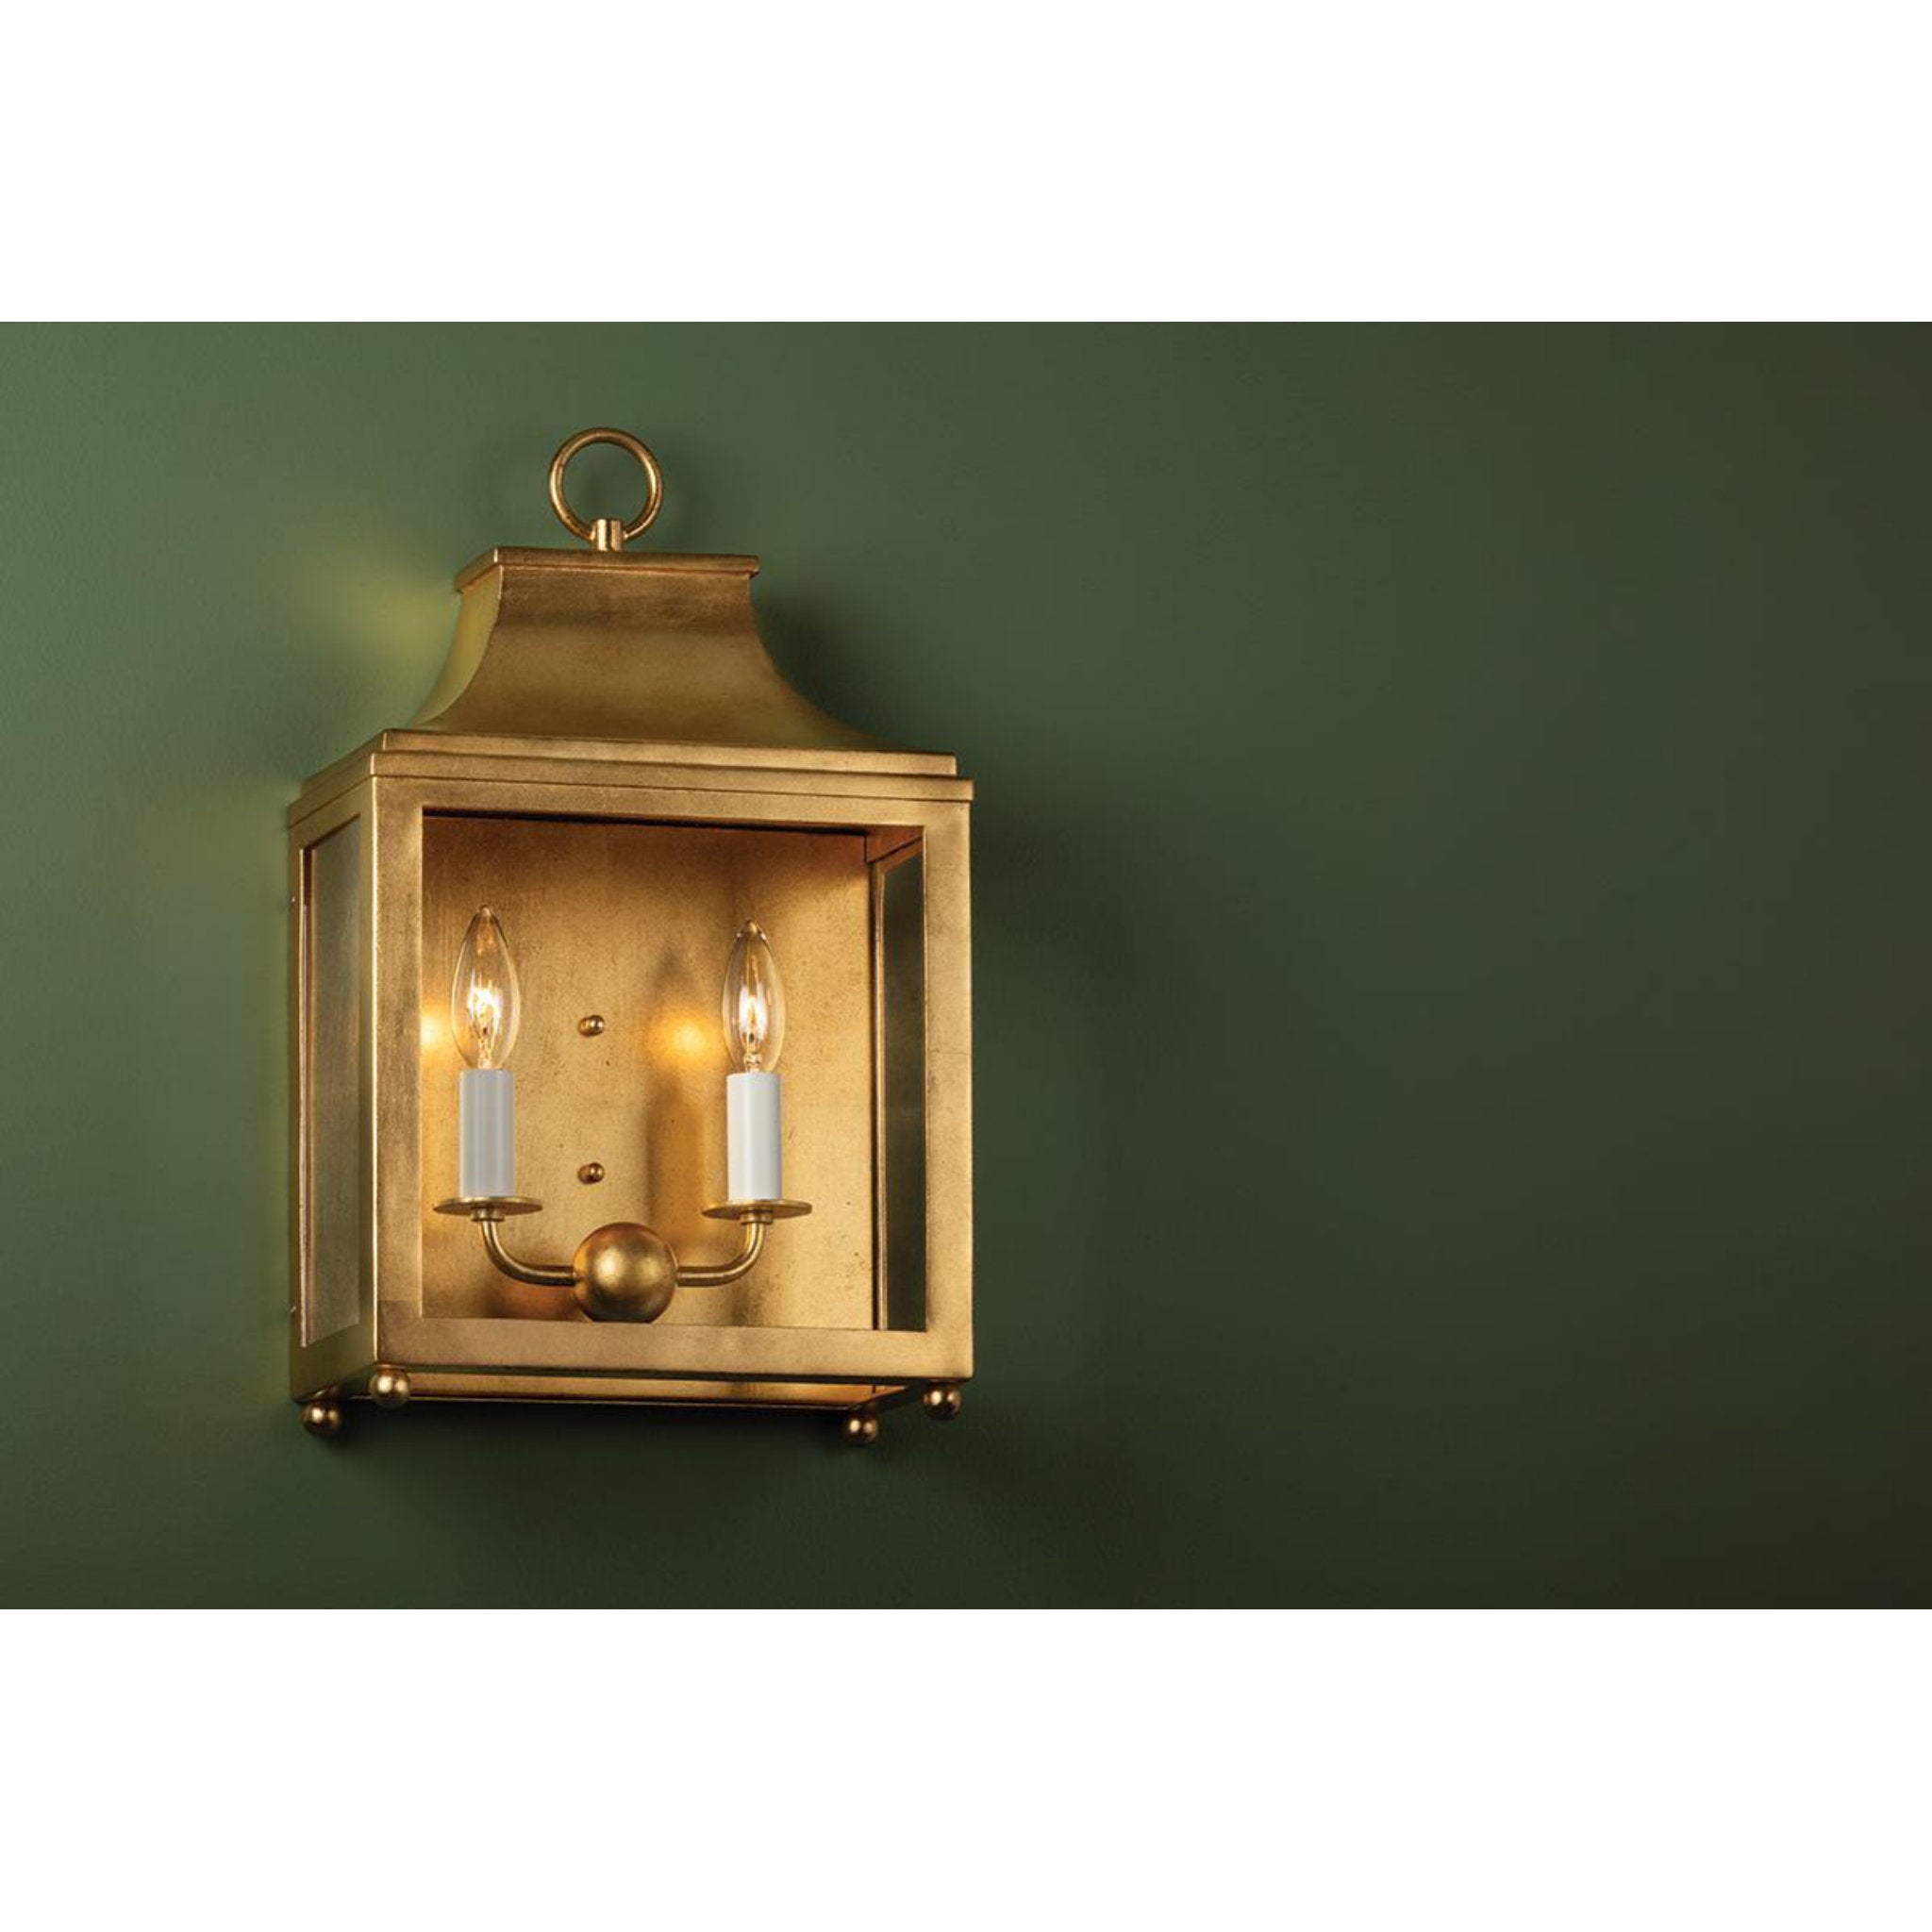 Leigh 2-Light Wall Sconce in Polished Nickel/Navy